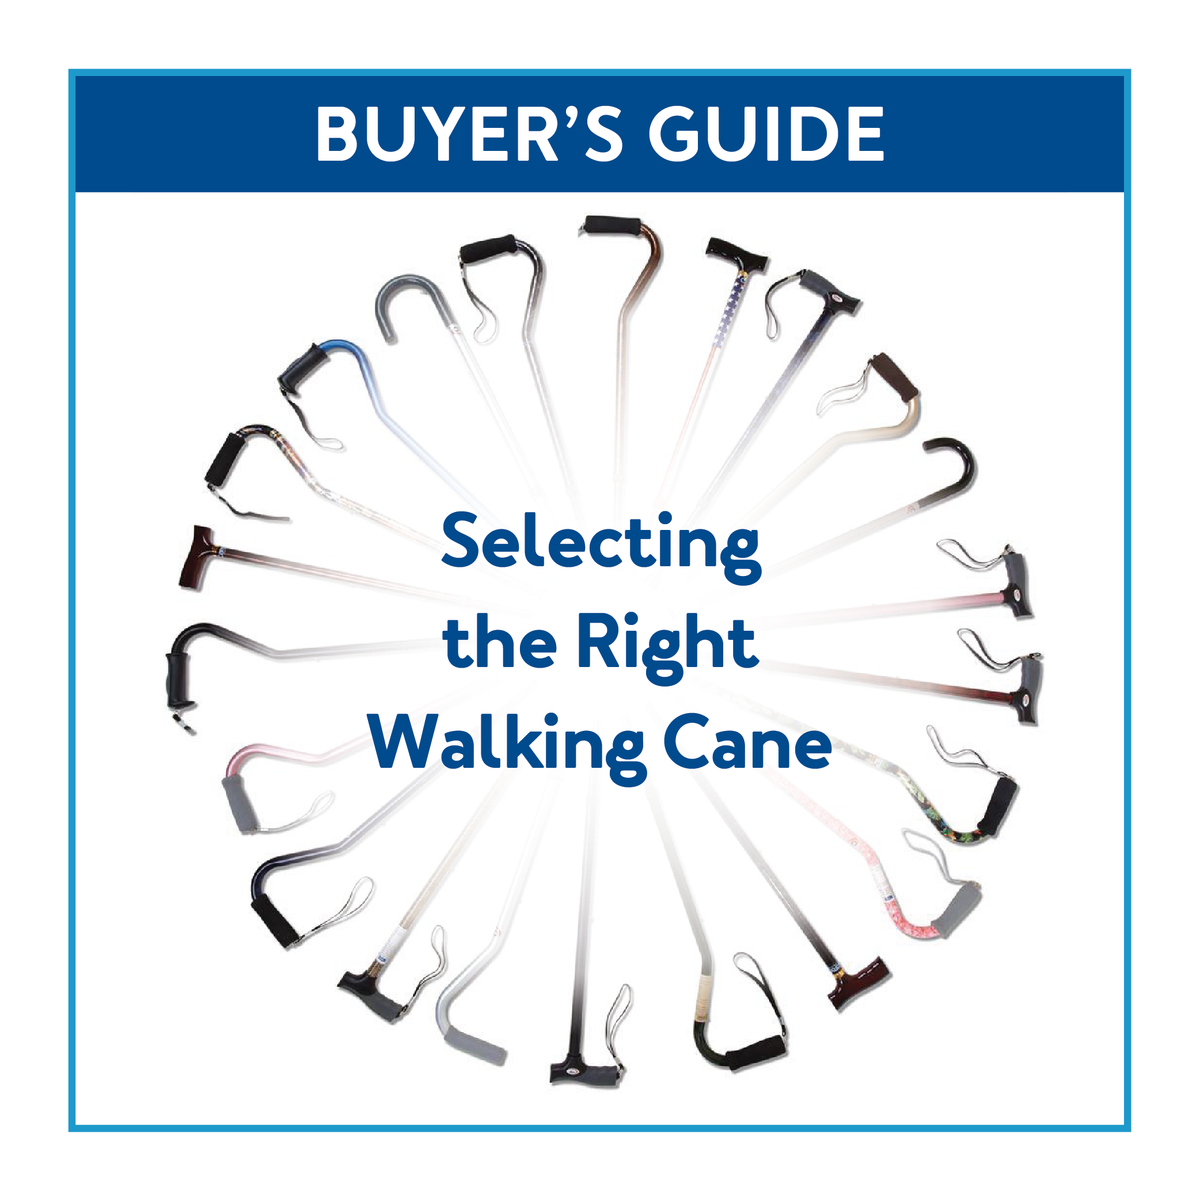 Walking canes encircled, bordered blue text: Buyer’s Guide: Selecting the Right Walking Cane